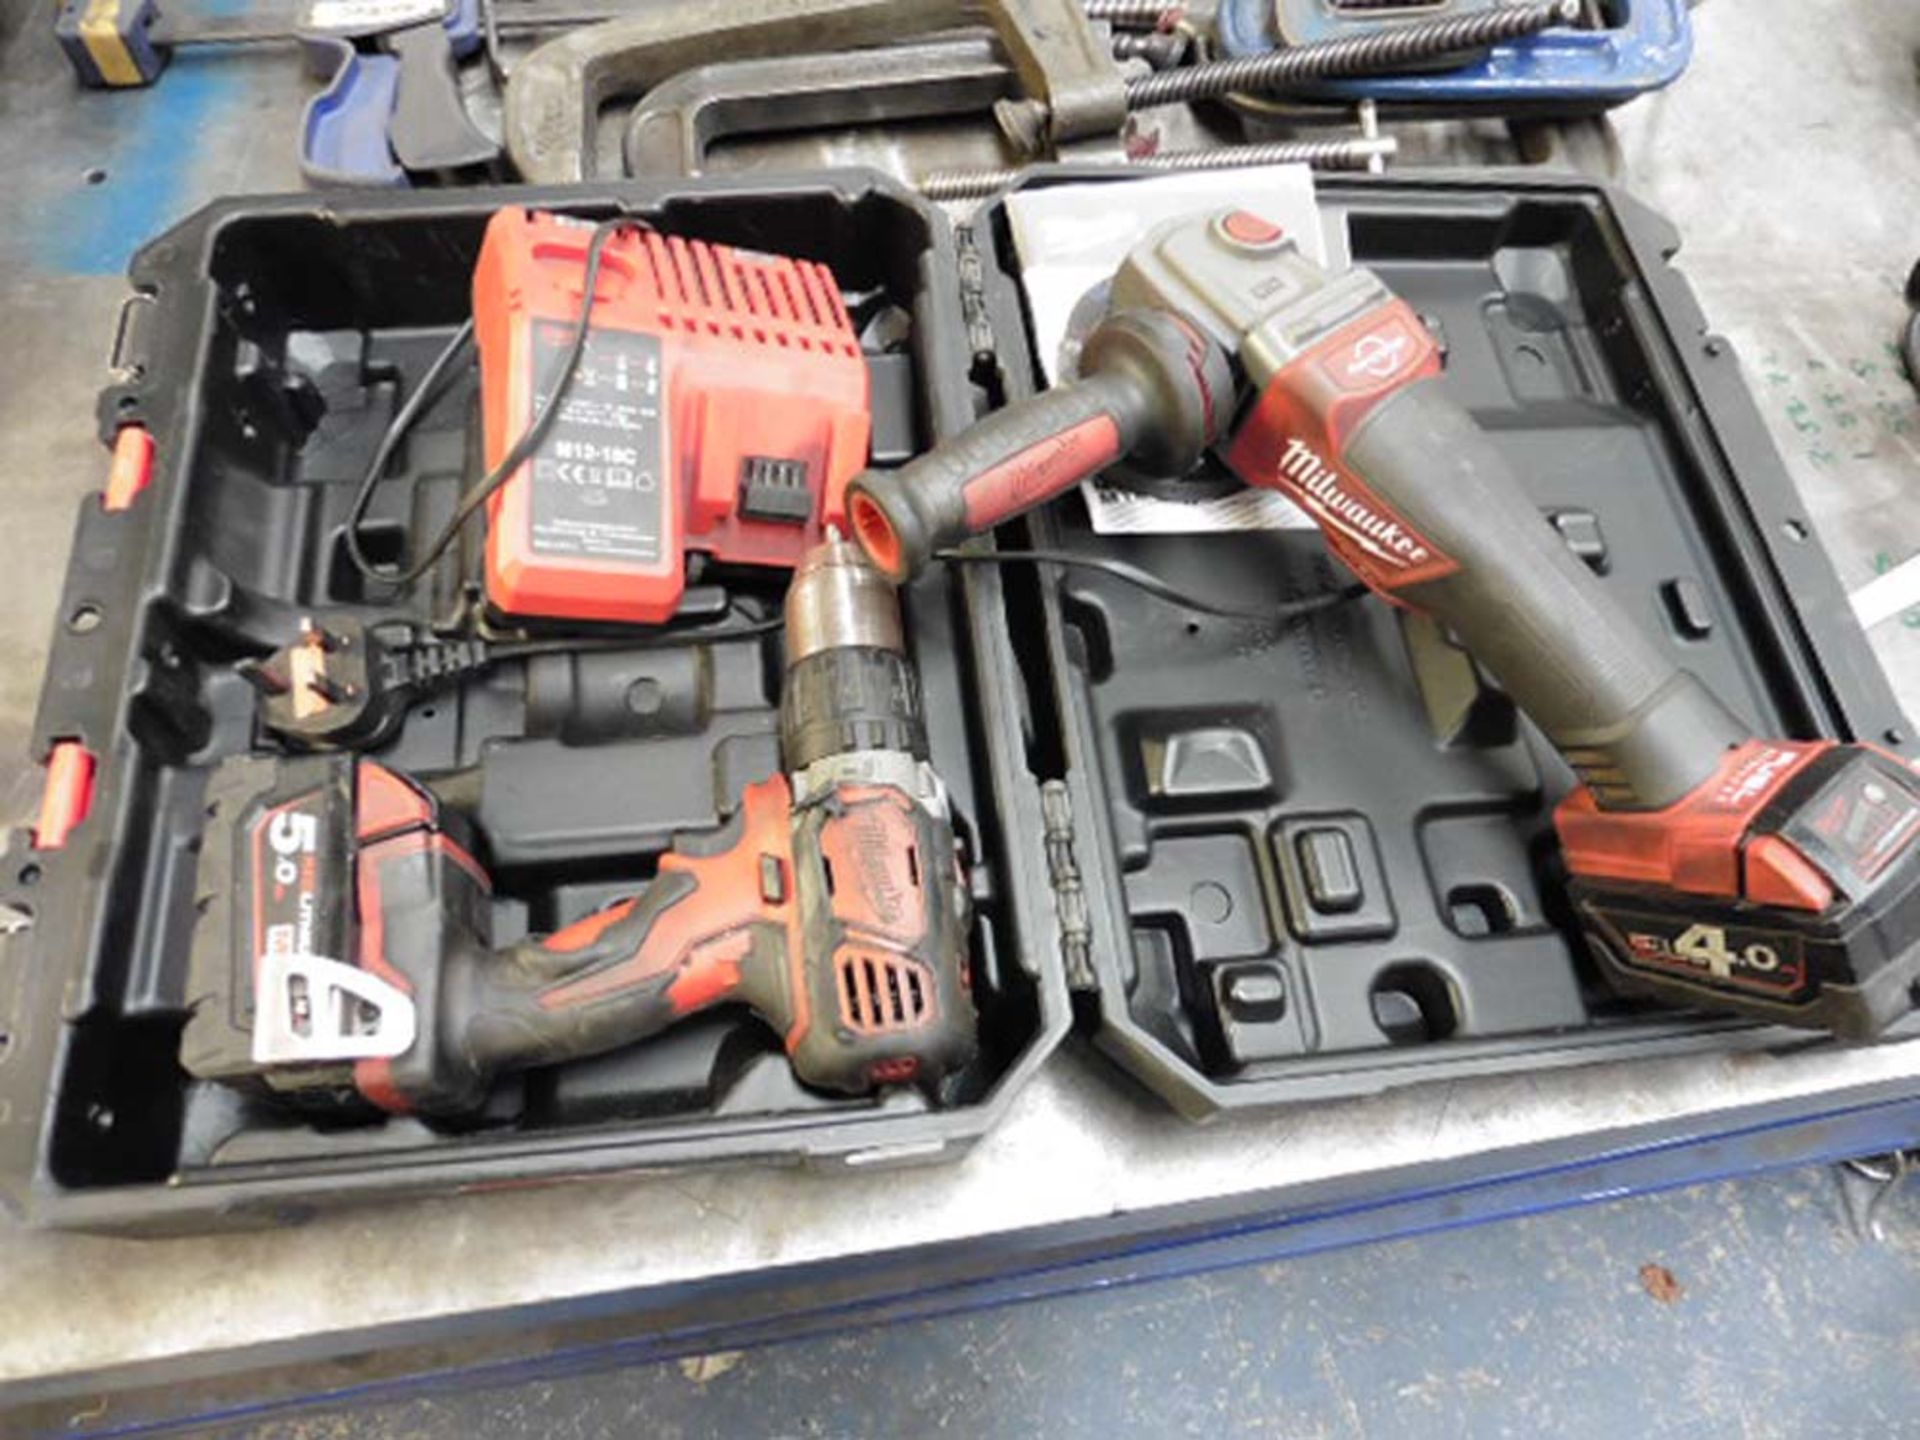 Milwaukee Red Lithium cordless drill and mini grinder with charger